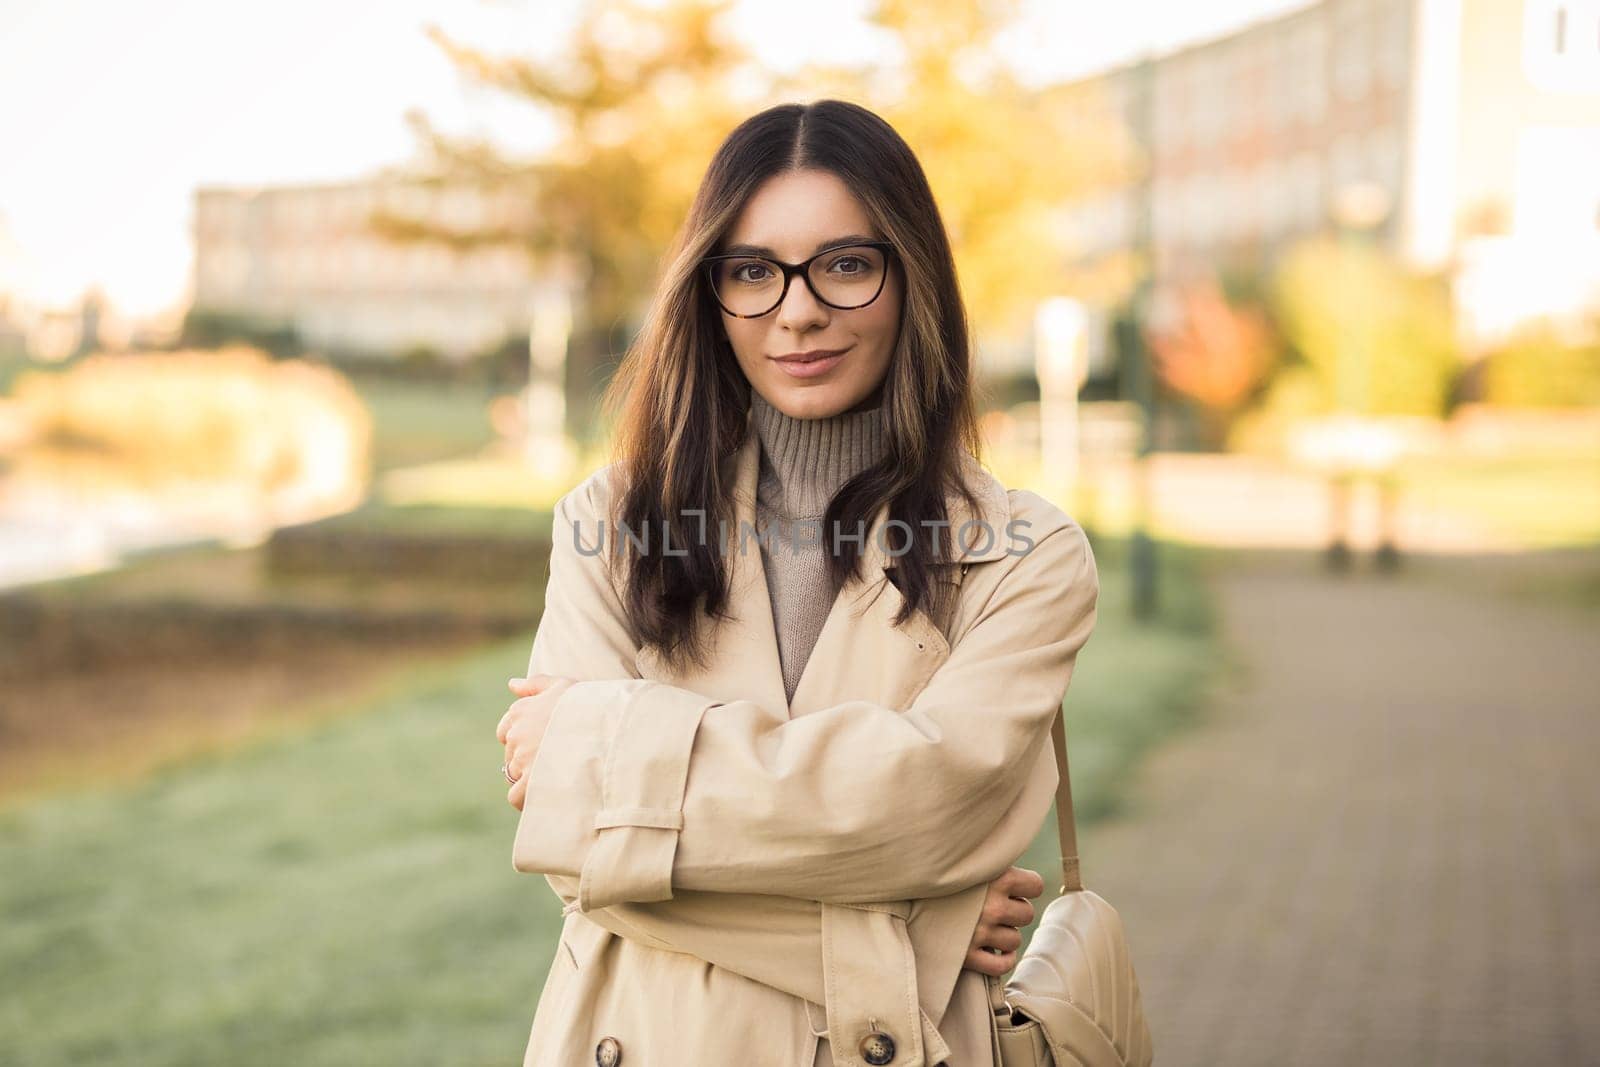 Beautiful LGTB woman 30s with glasses in the street confidently and profoundly looking towards the camera.